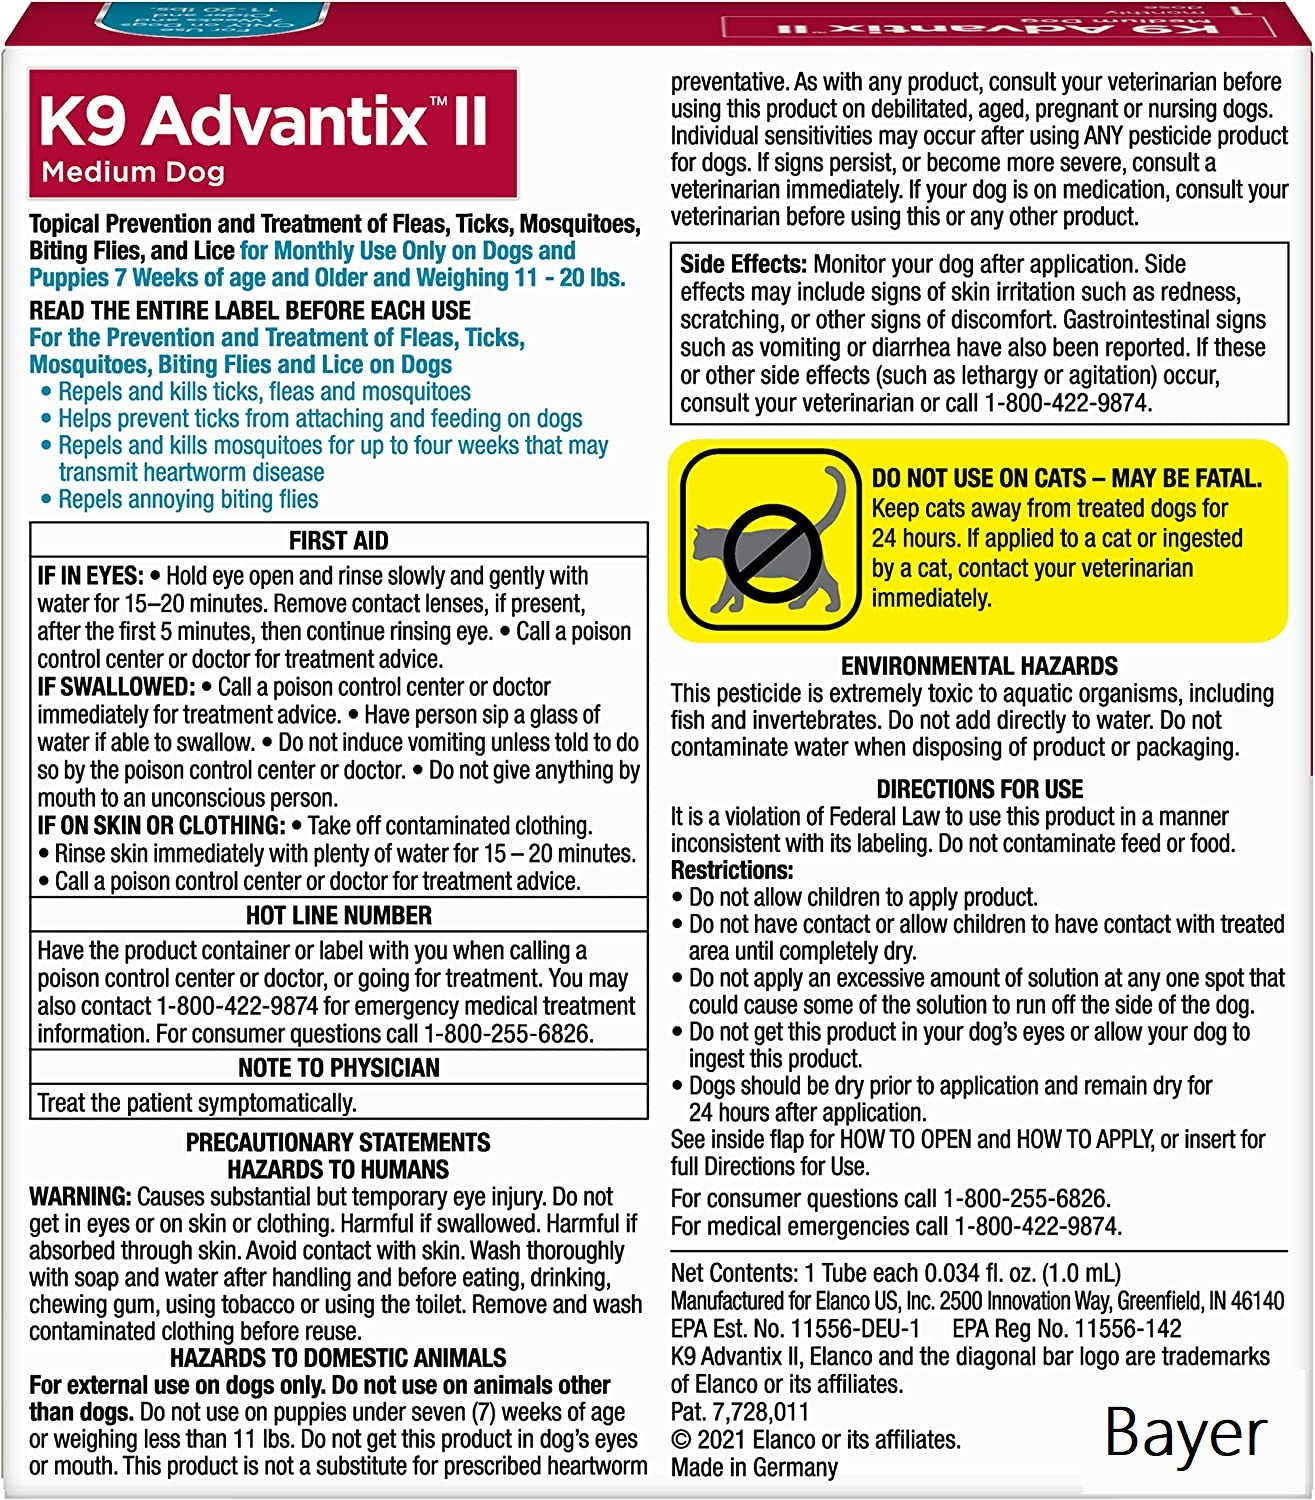 Bayer K9 Advantix II Medium Dog 1 Monthly Dose For Dogs Only 7 Weeks Old & Above Only - 11-20lbs